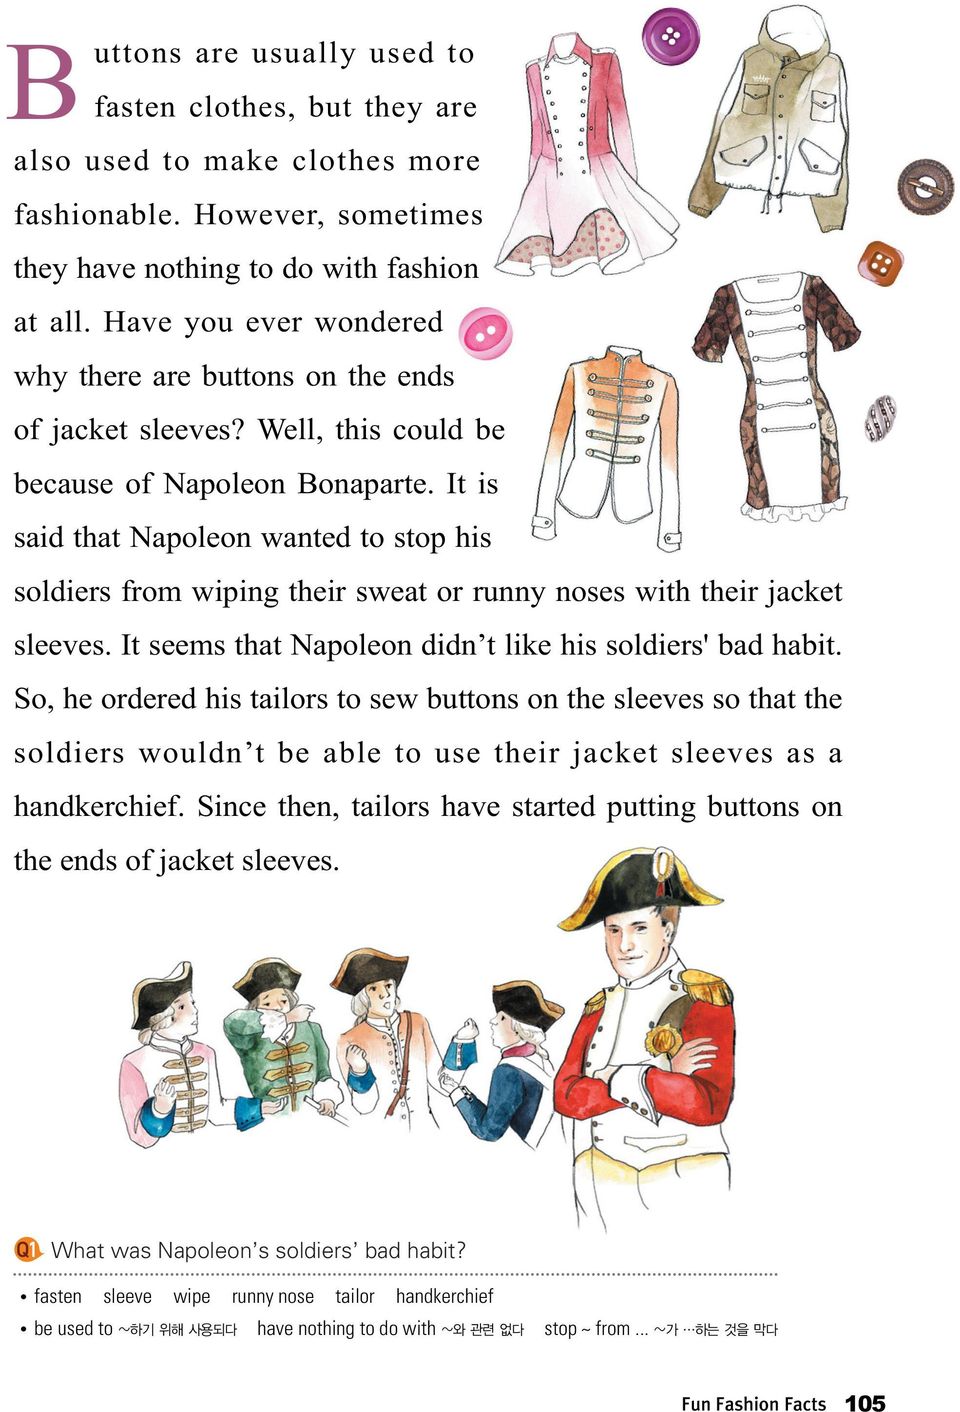 It is said that Napoleon wanted to stop his soldiers from wiping their sweat or runny noses with their jacket sleeves. It seems that Napoleon didn t like his soldiers' bad habit.